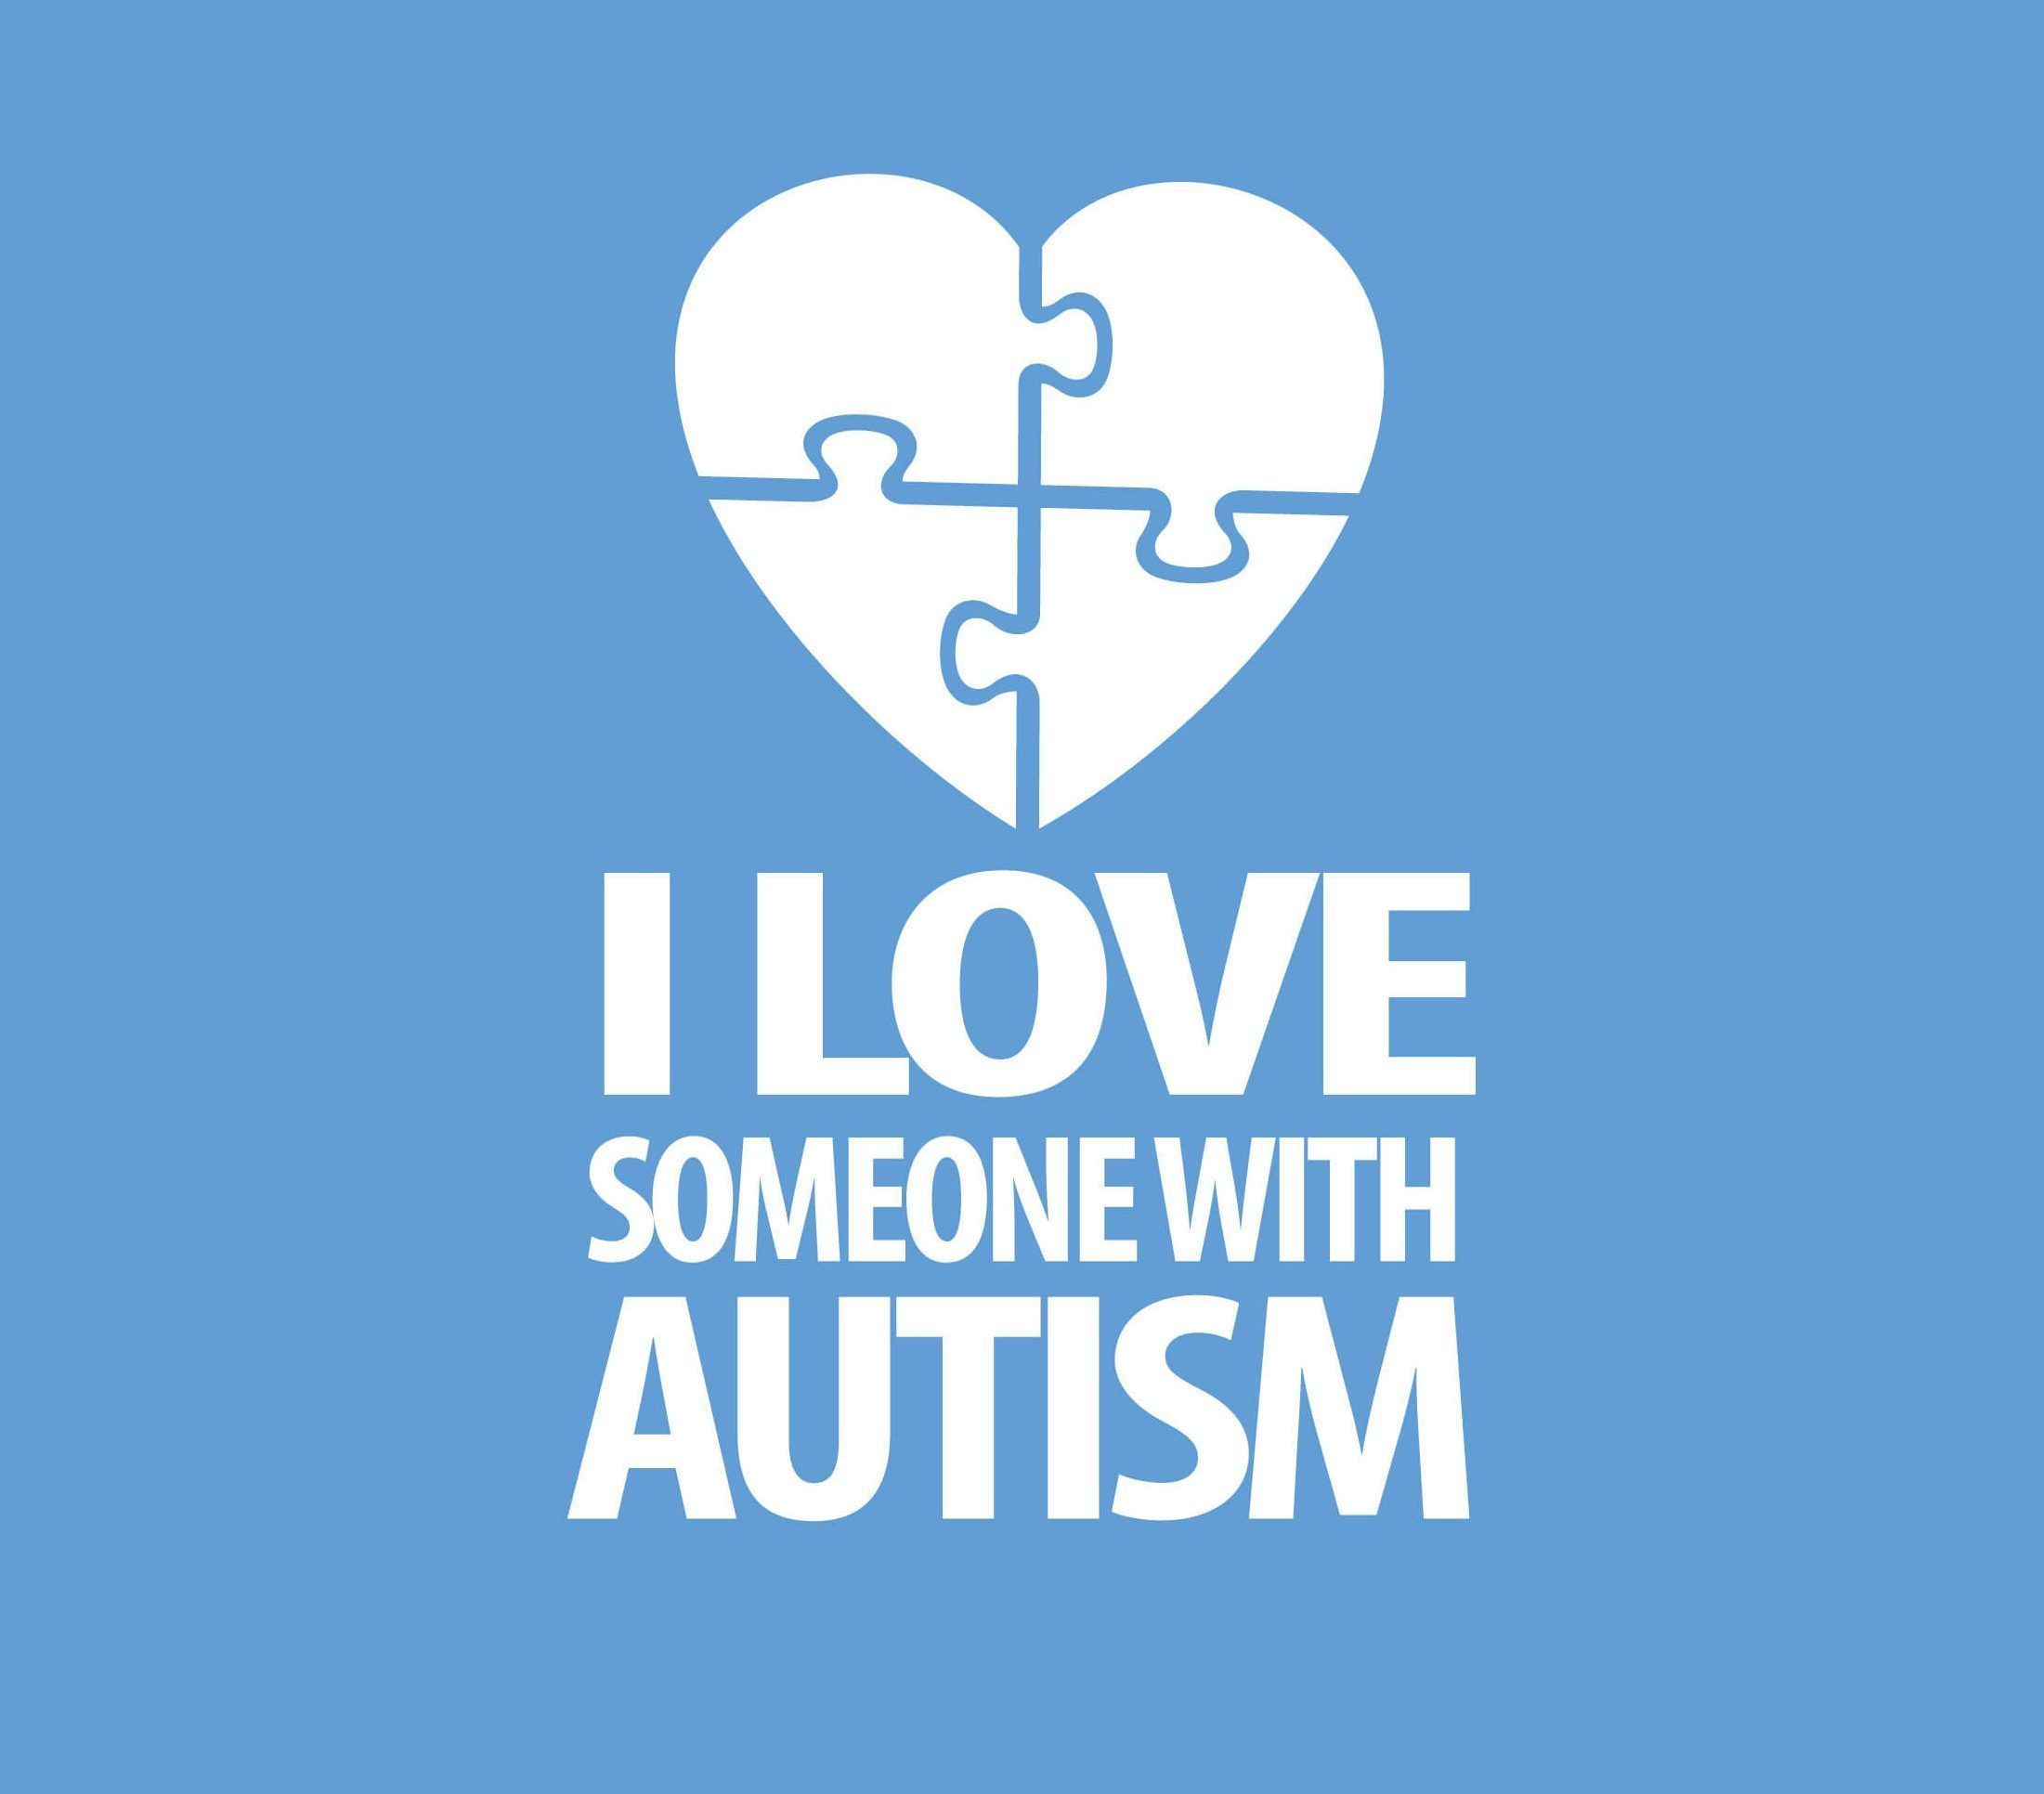 Autism Background Images HD Pictures and Wallpaper For Free Download   Pngtree